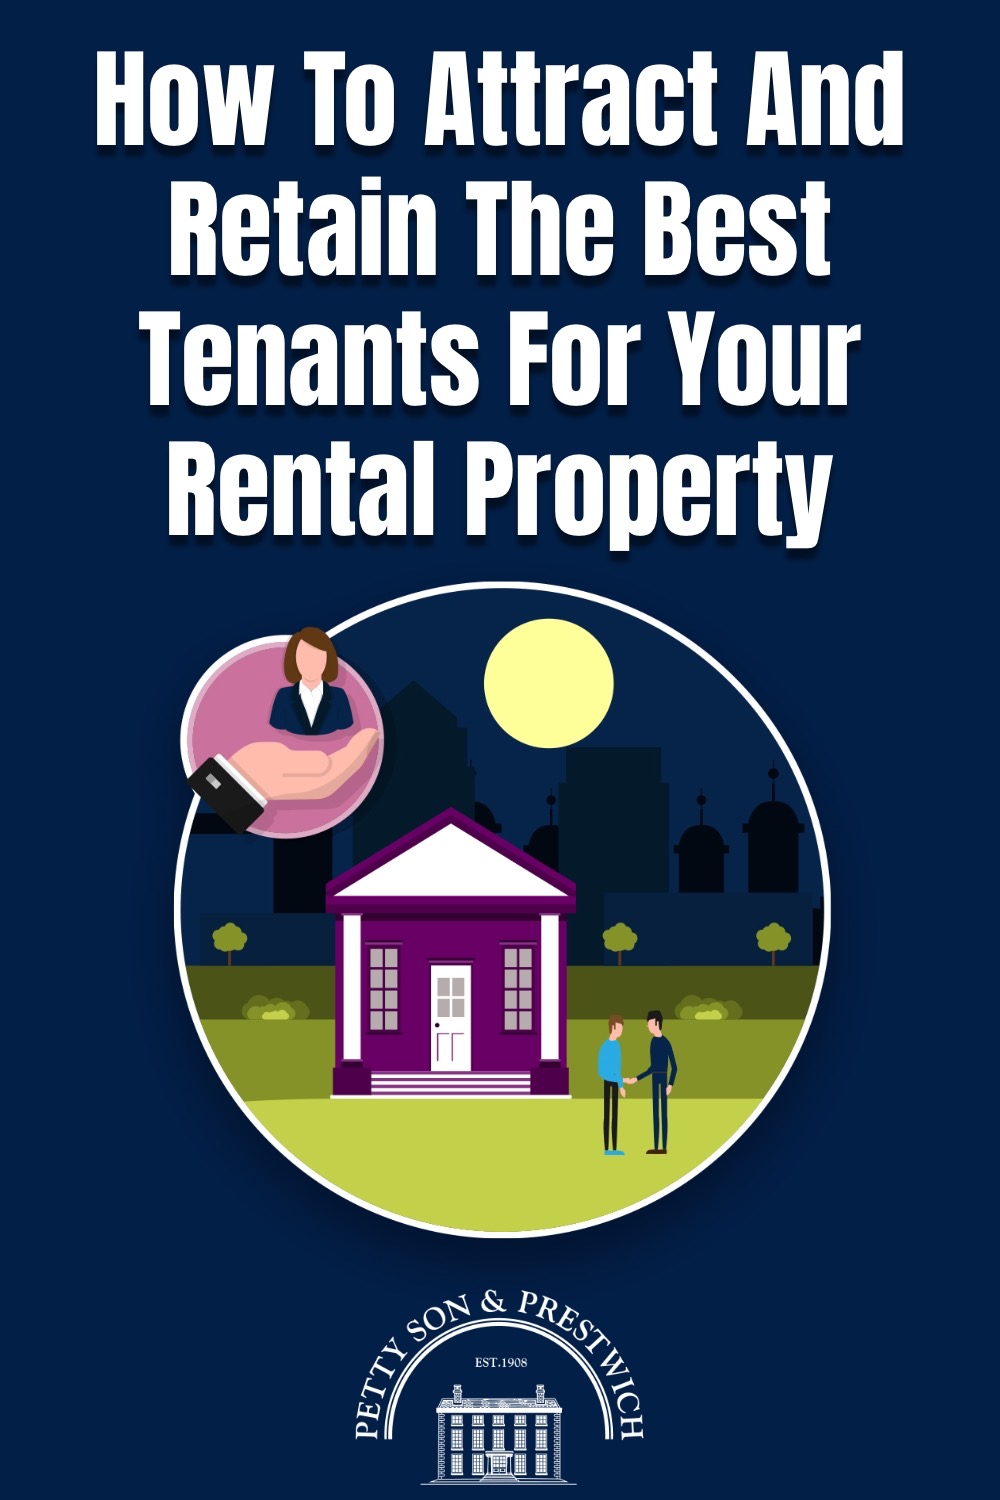 how to attract and retain the best tenants in a rental property